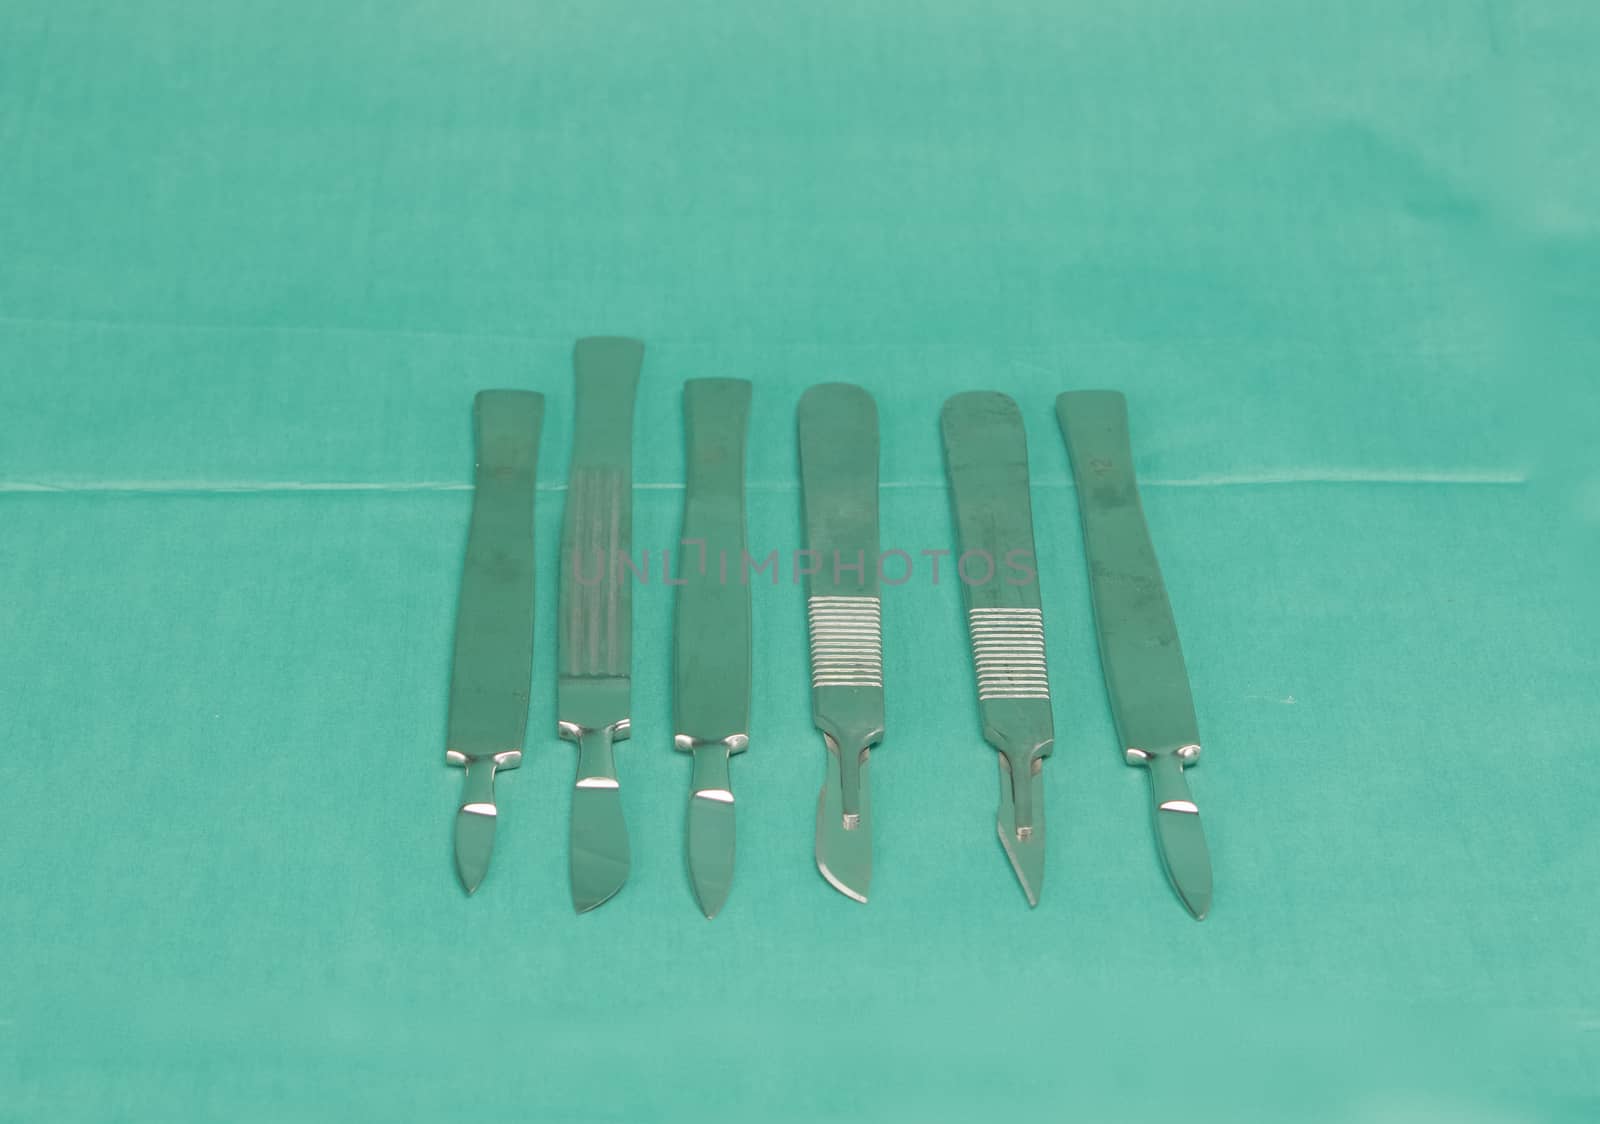 Stainless scalpel on green fabric by ninun